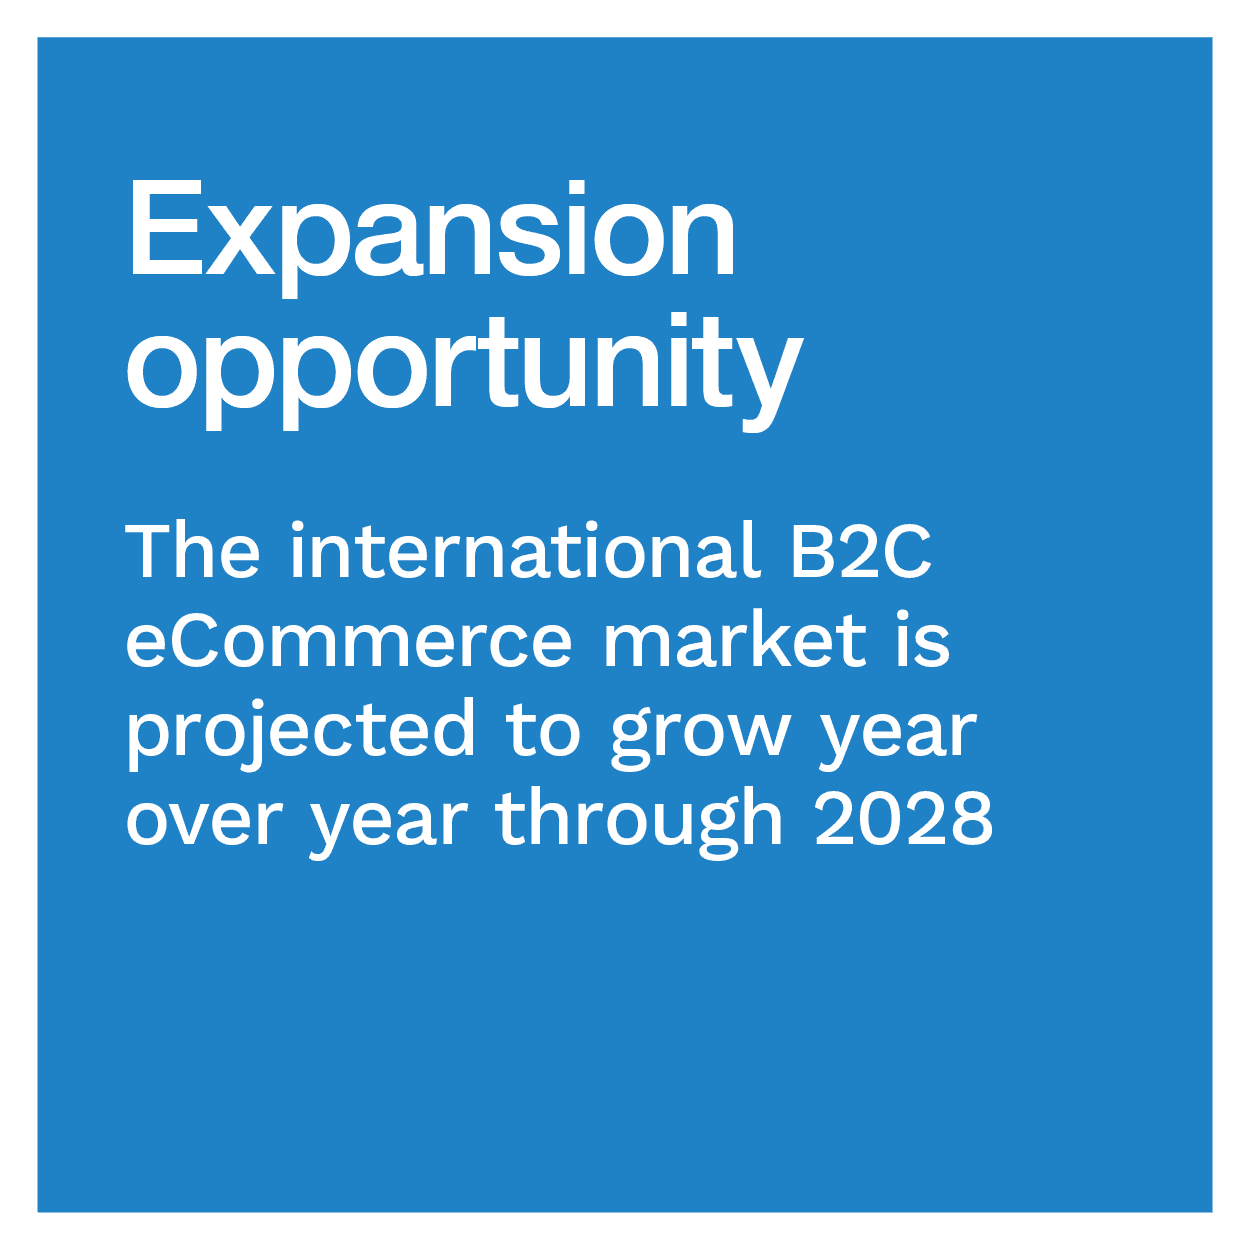 Expansion opportunity: The international B2C eCommerce market is projected to grow year over year through 2028